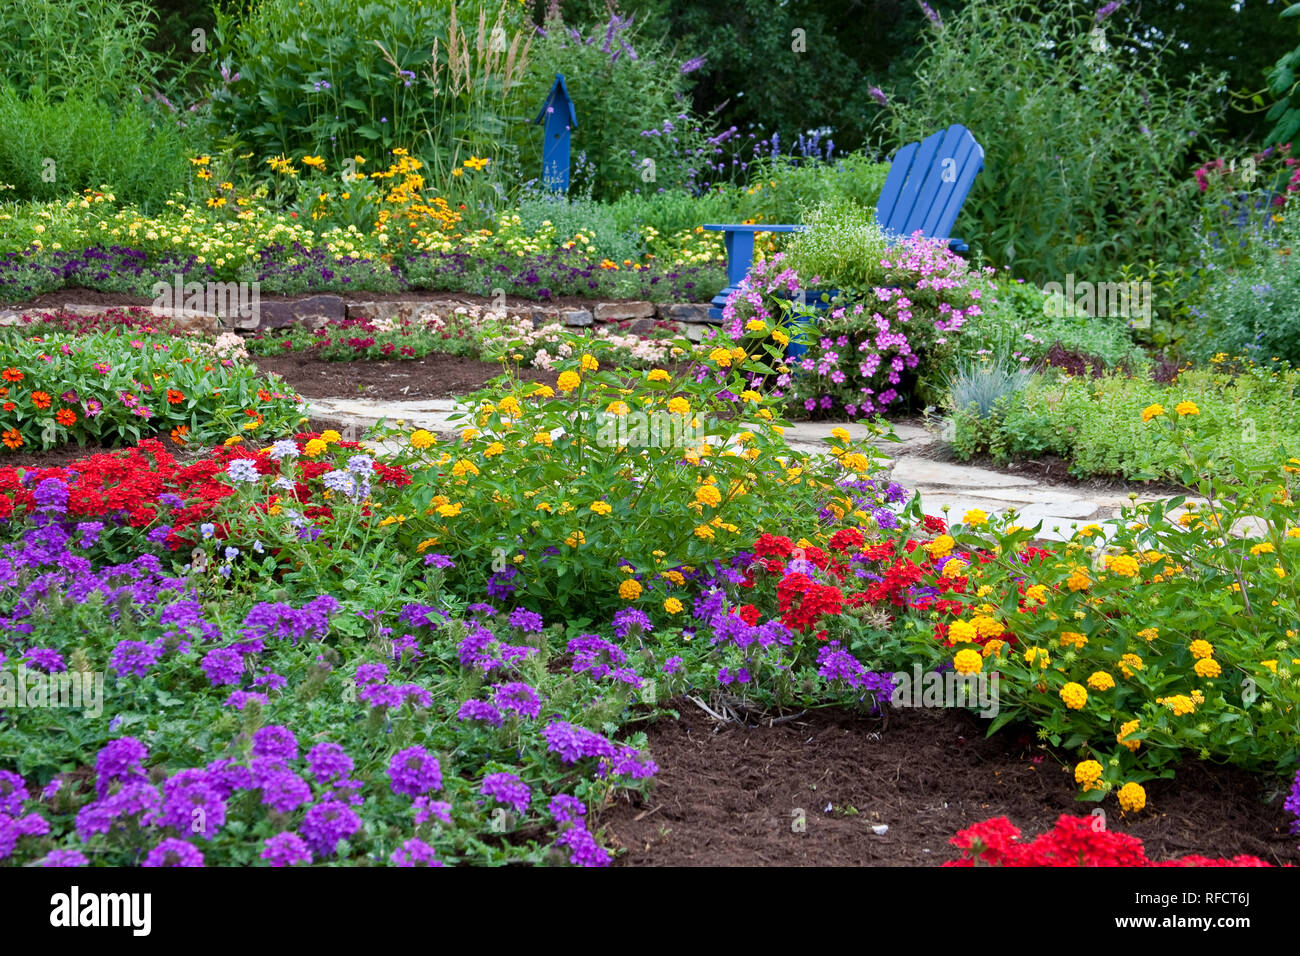 63821-21906 Flower garden with blue Adirondack chair and blue birdhouse.  Butterfly Bushes, Peach, Red  & Purple Verbenas, Yellow & New Gold Lantana ( Stock Photo